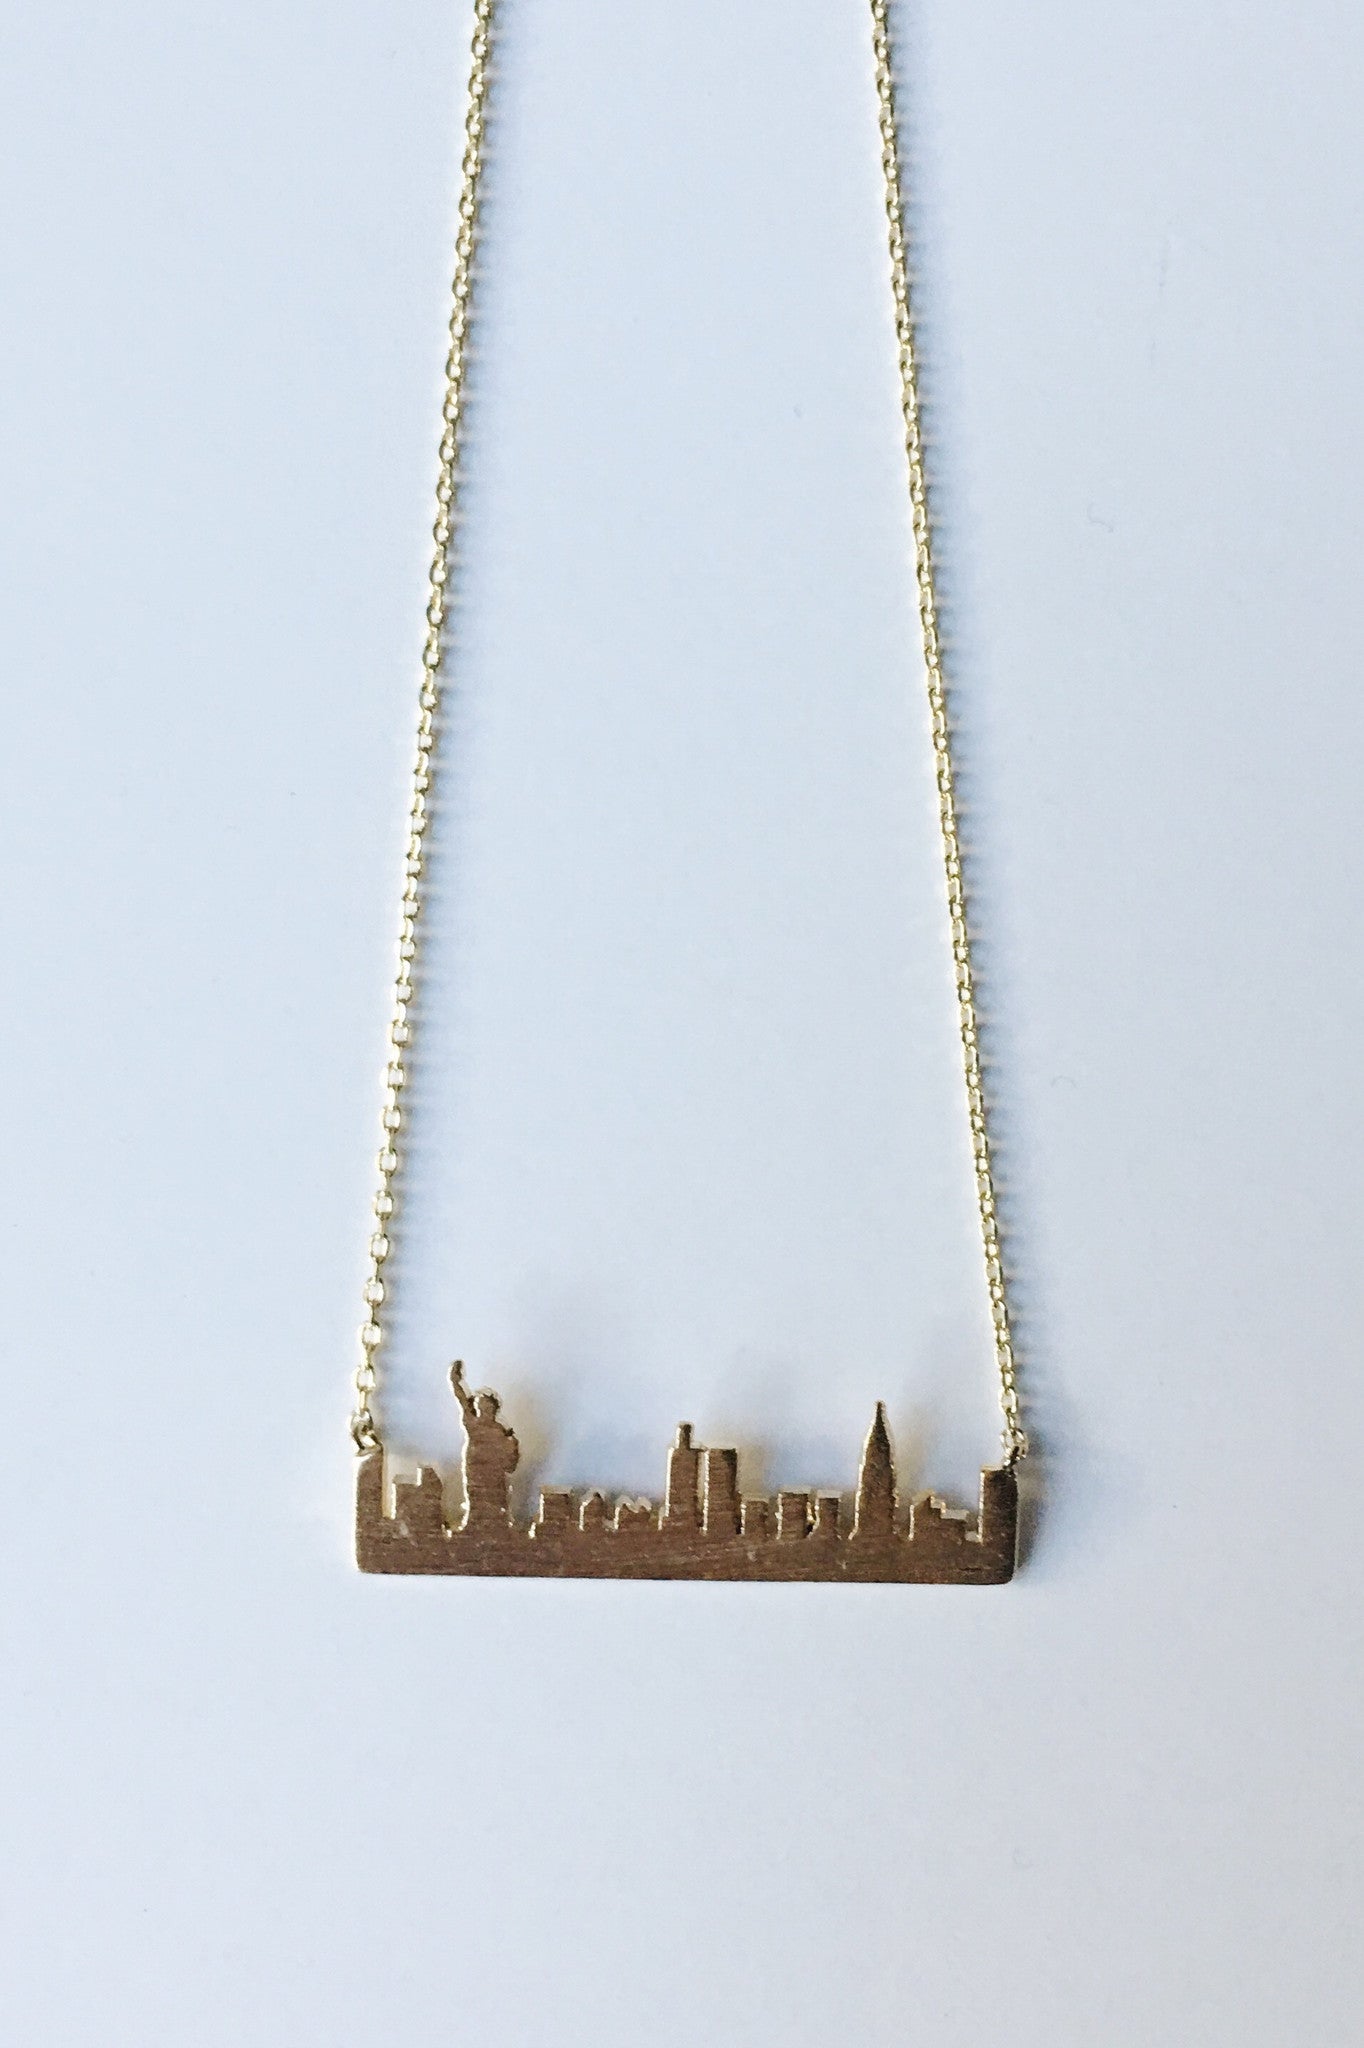 The Button Hook Pendant — THE ONE I LOVE NYC